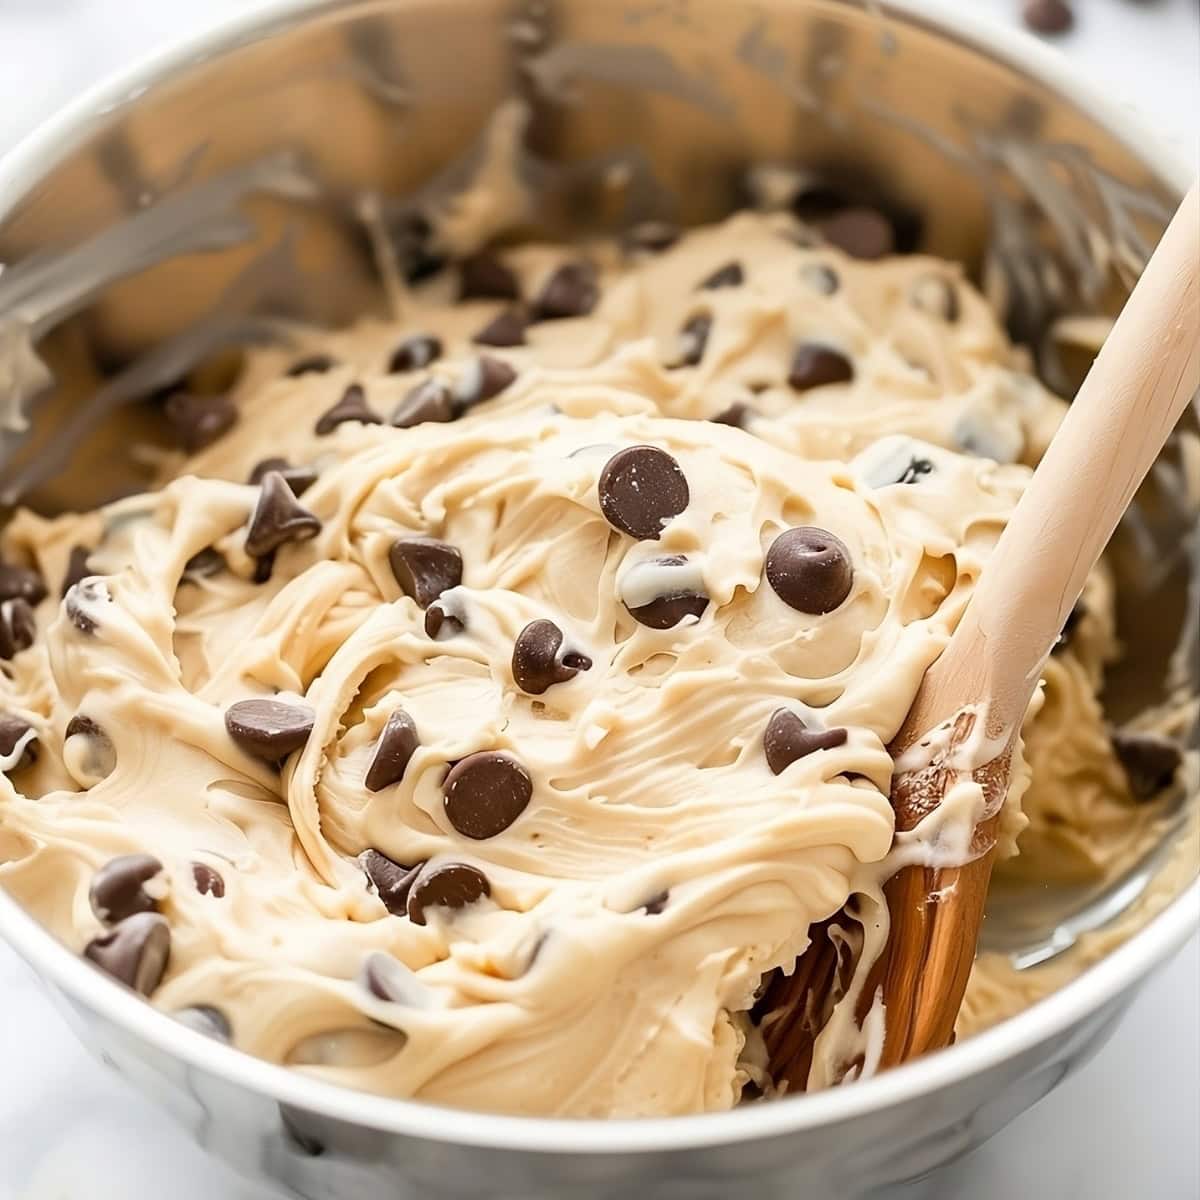 Creamy cookie dough dip with chocolate chips mixed in a mixing bowl.